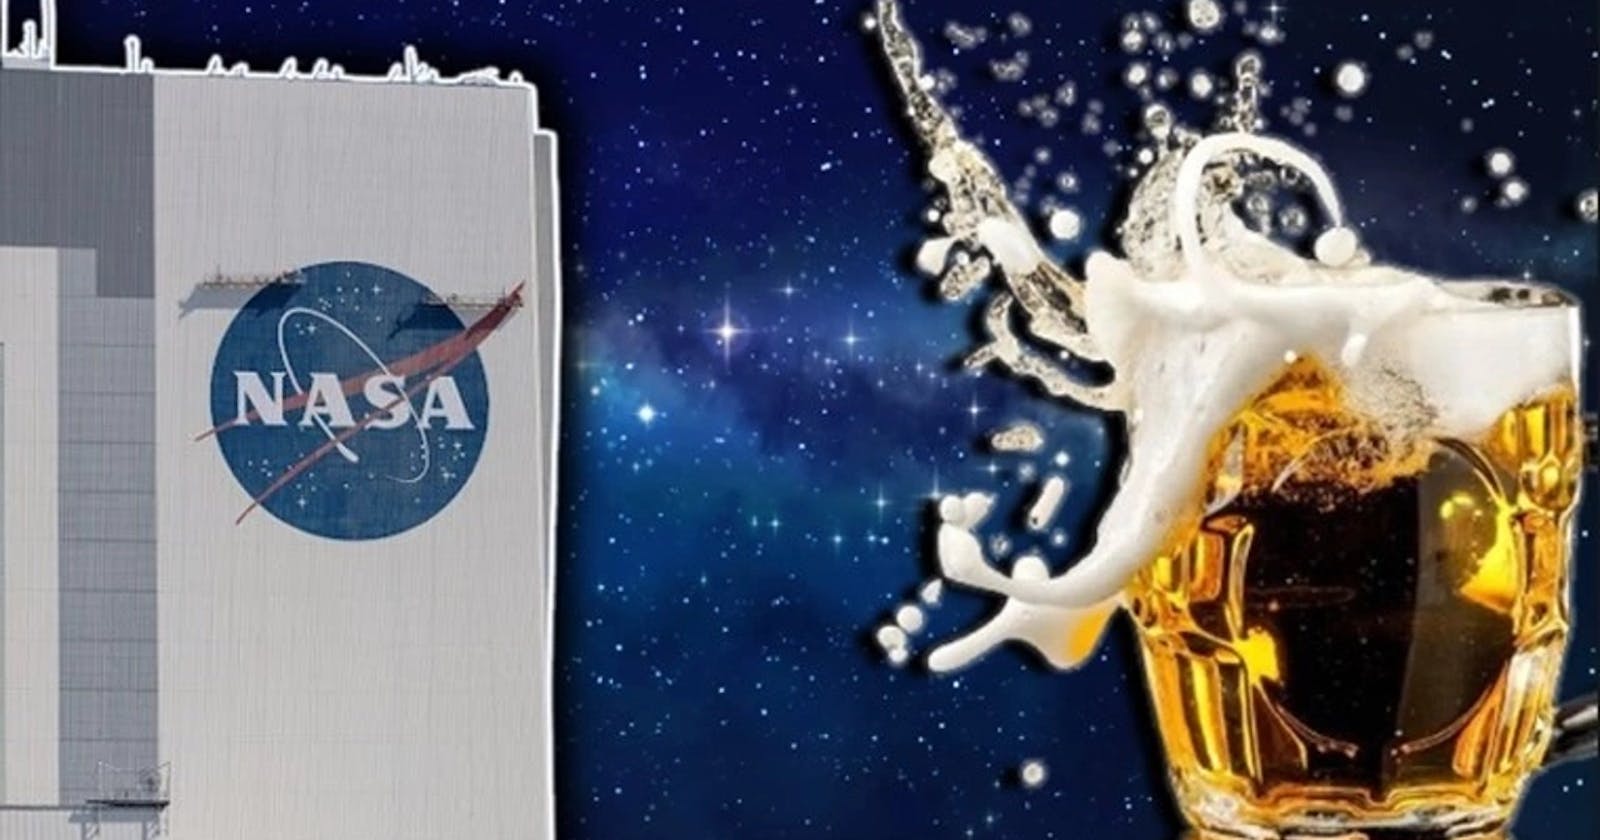 NASA Confirms Discovery of Beer Ingredients in Space